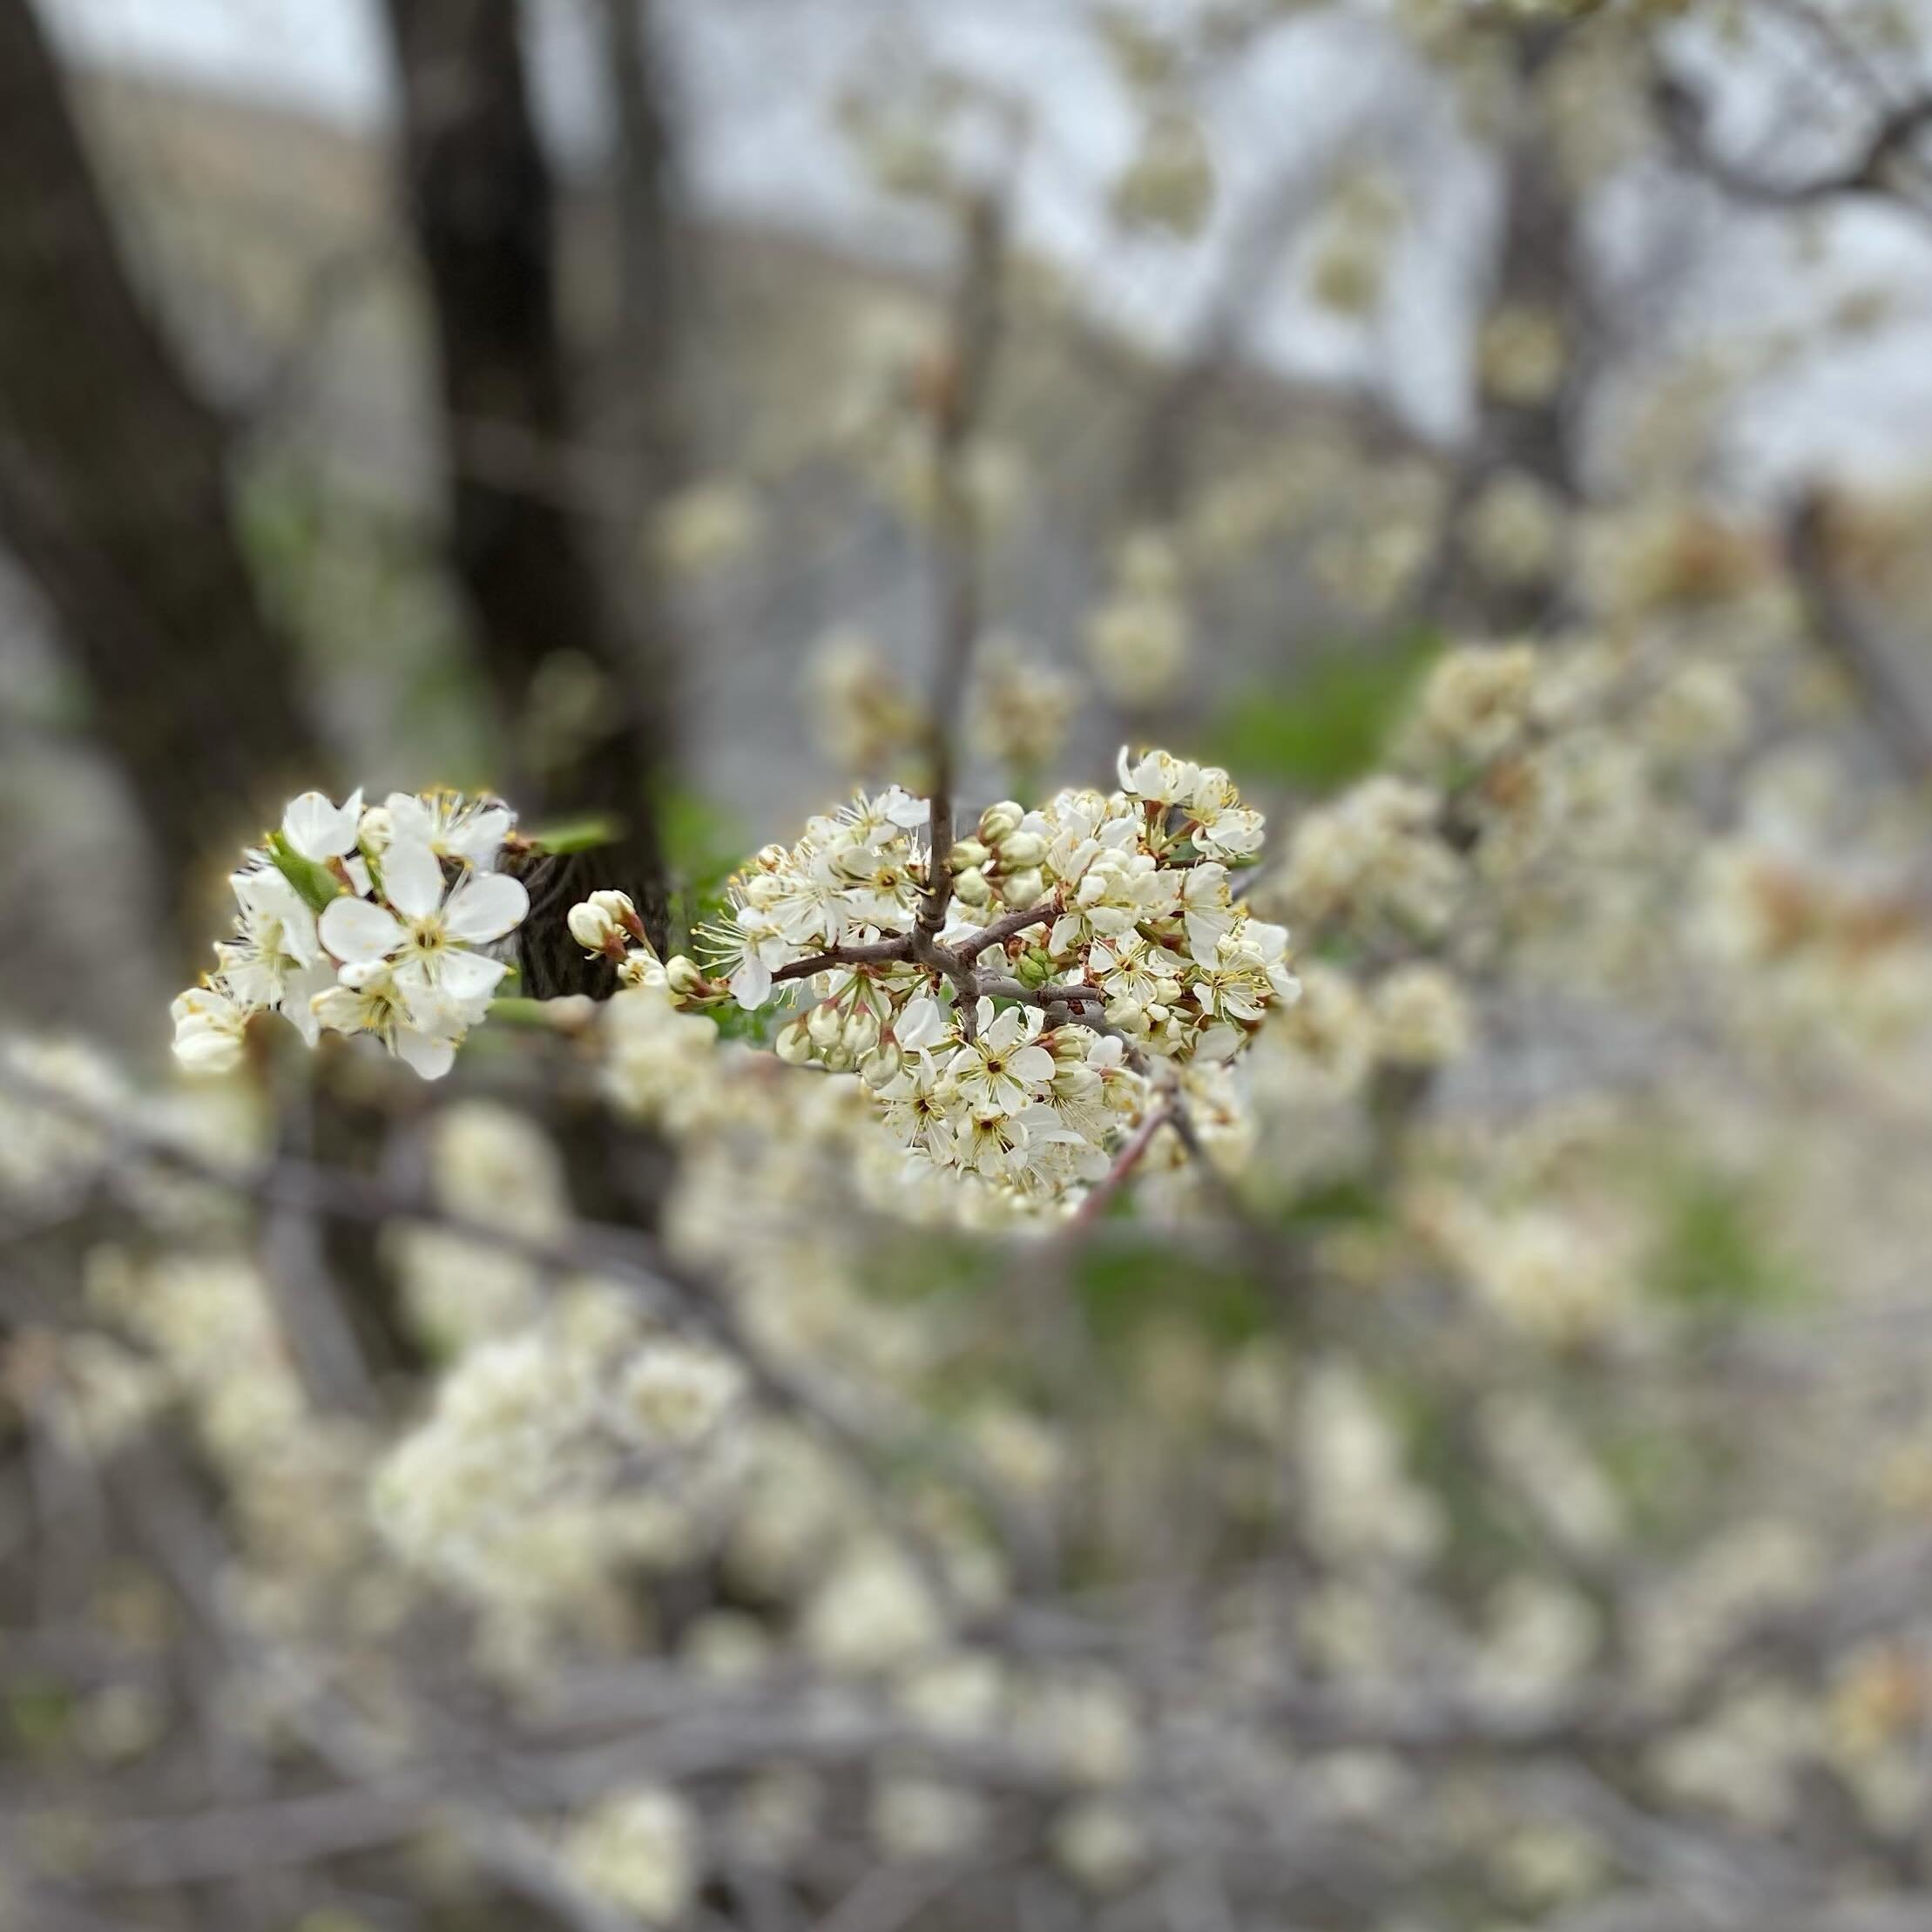 Blossoms before leaves 
The tease of springtime beckons
Breeze makes petals dance

#nationalpoetrymonth #haikuaday #haiku #fivesevenfive #nature #time #fortbentonlibrary #fortbentonmontana #fortbenton #chouteaucounty #montana